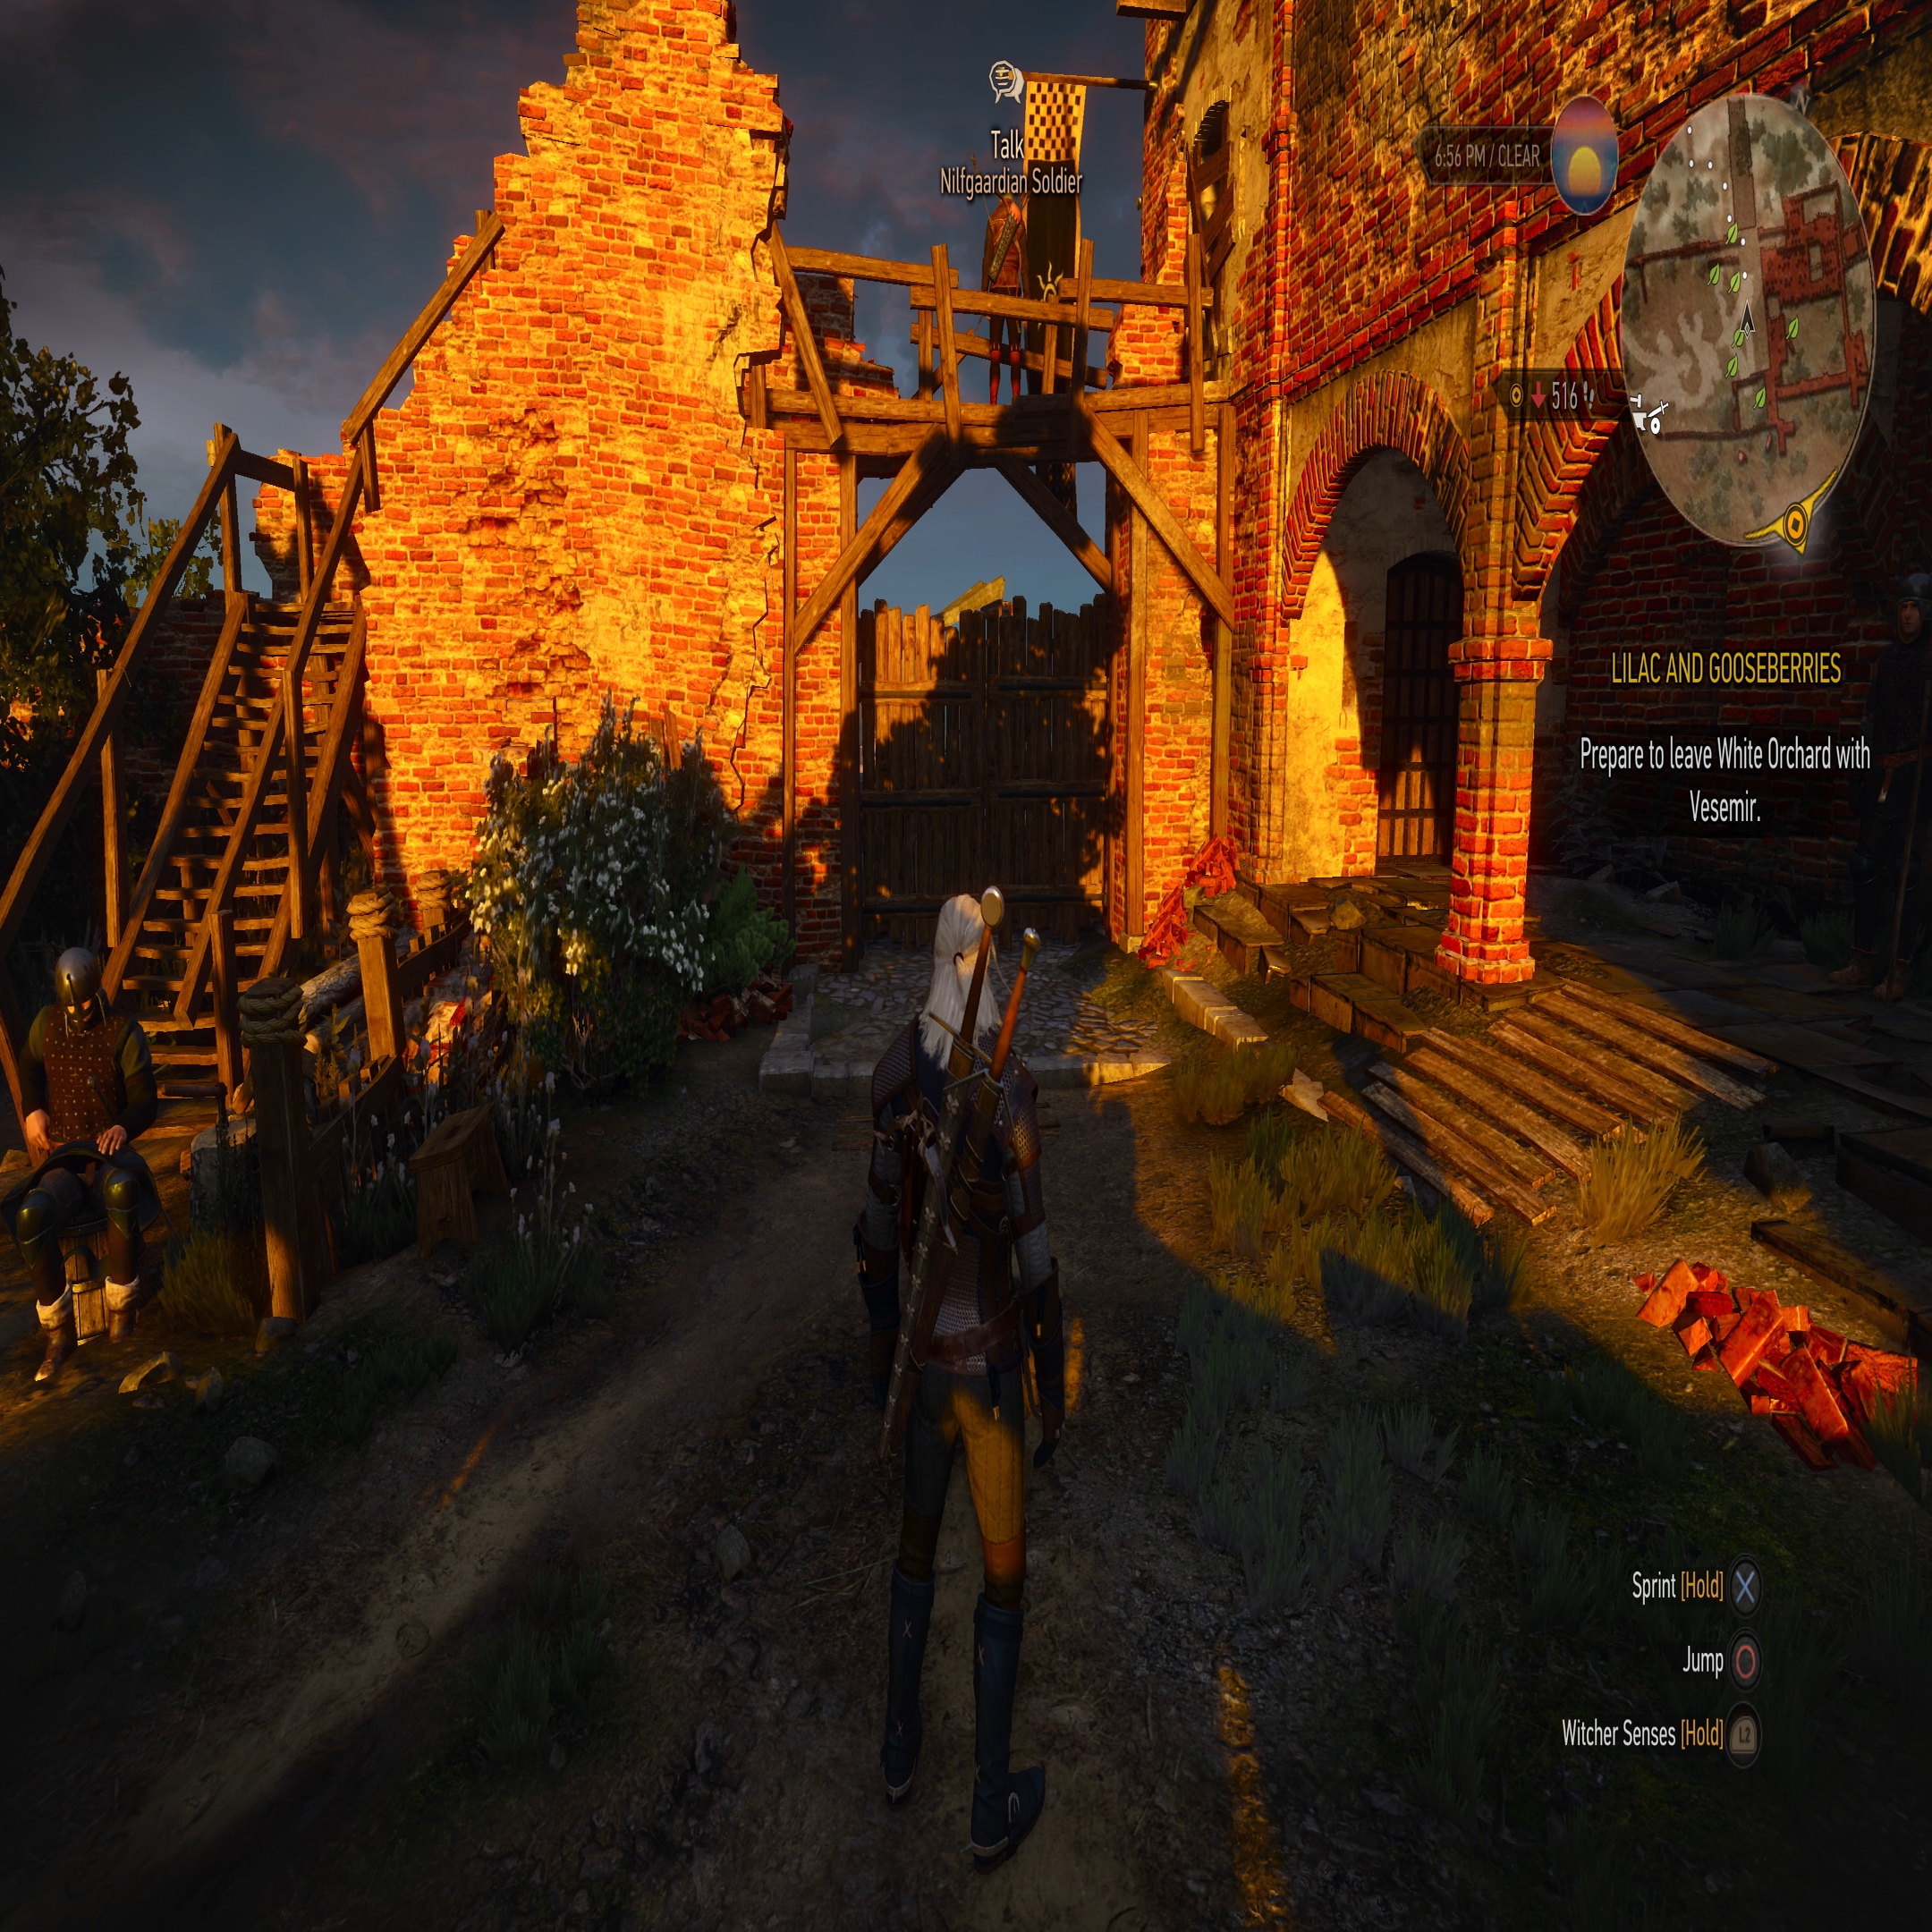 The Witcher 3 Amazing Screenshots from the PS4 Version